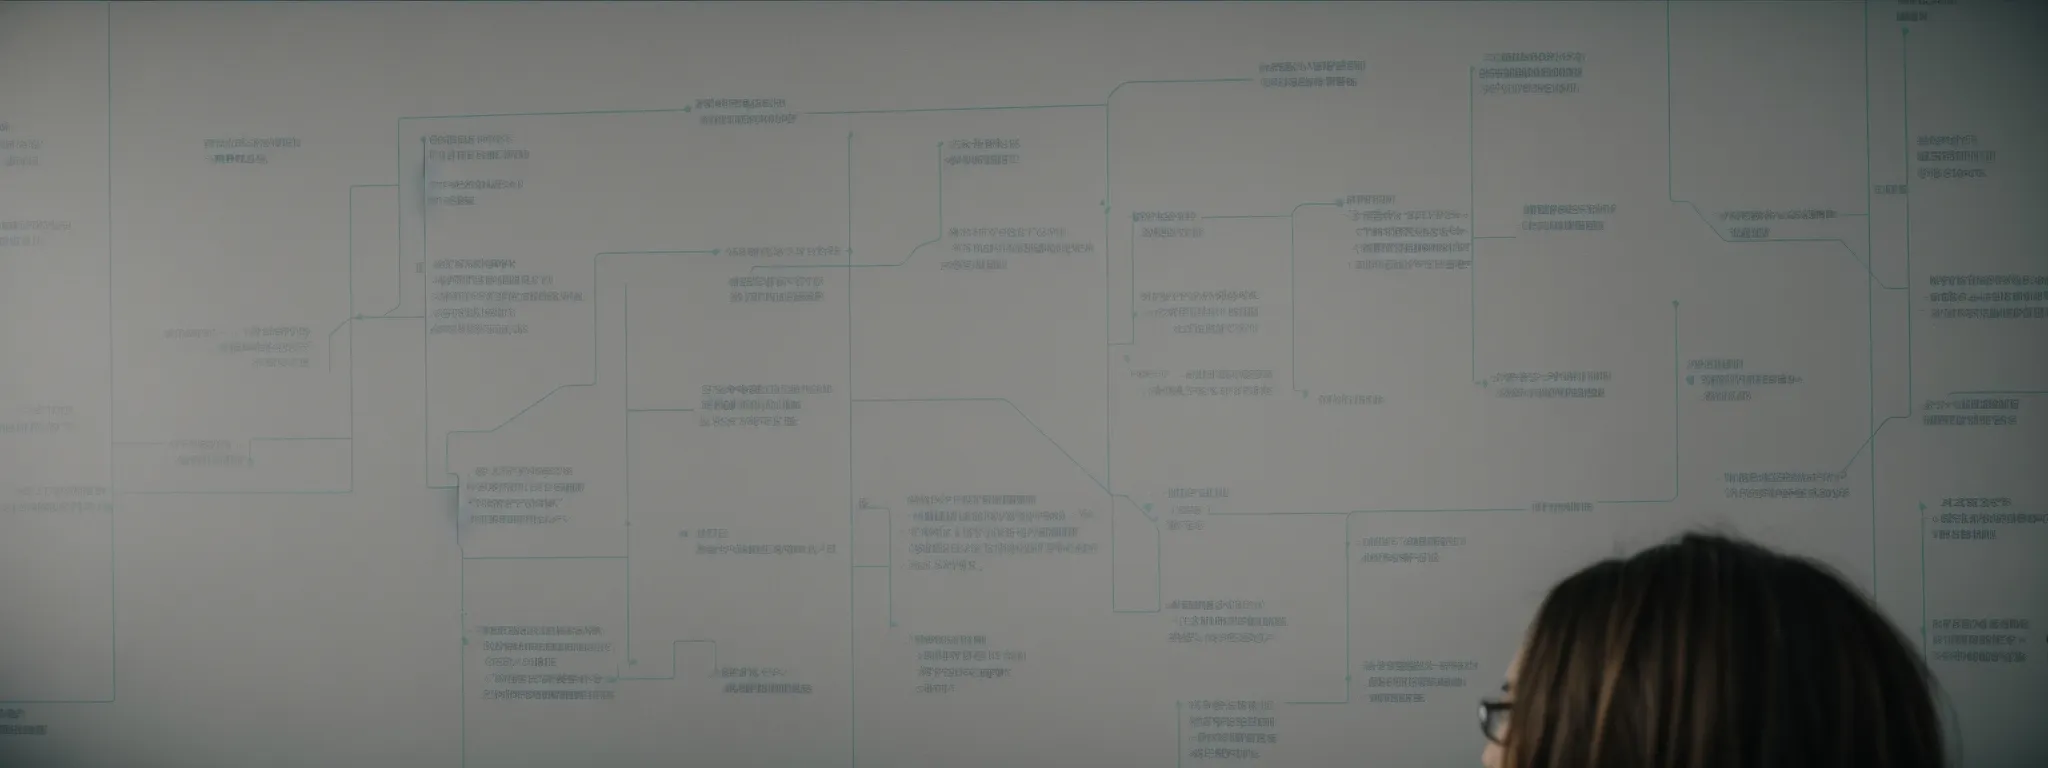 a person calmly studying a large, complex flowchart that visually represents various keyword strategies with focus on the longer phrases branching out.